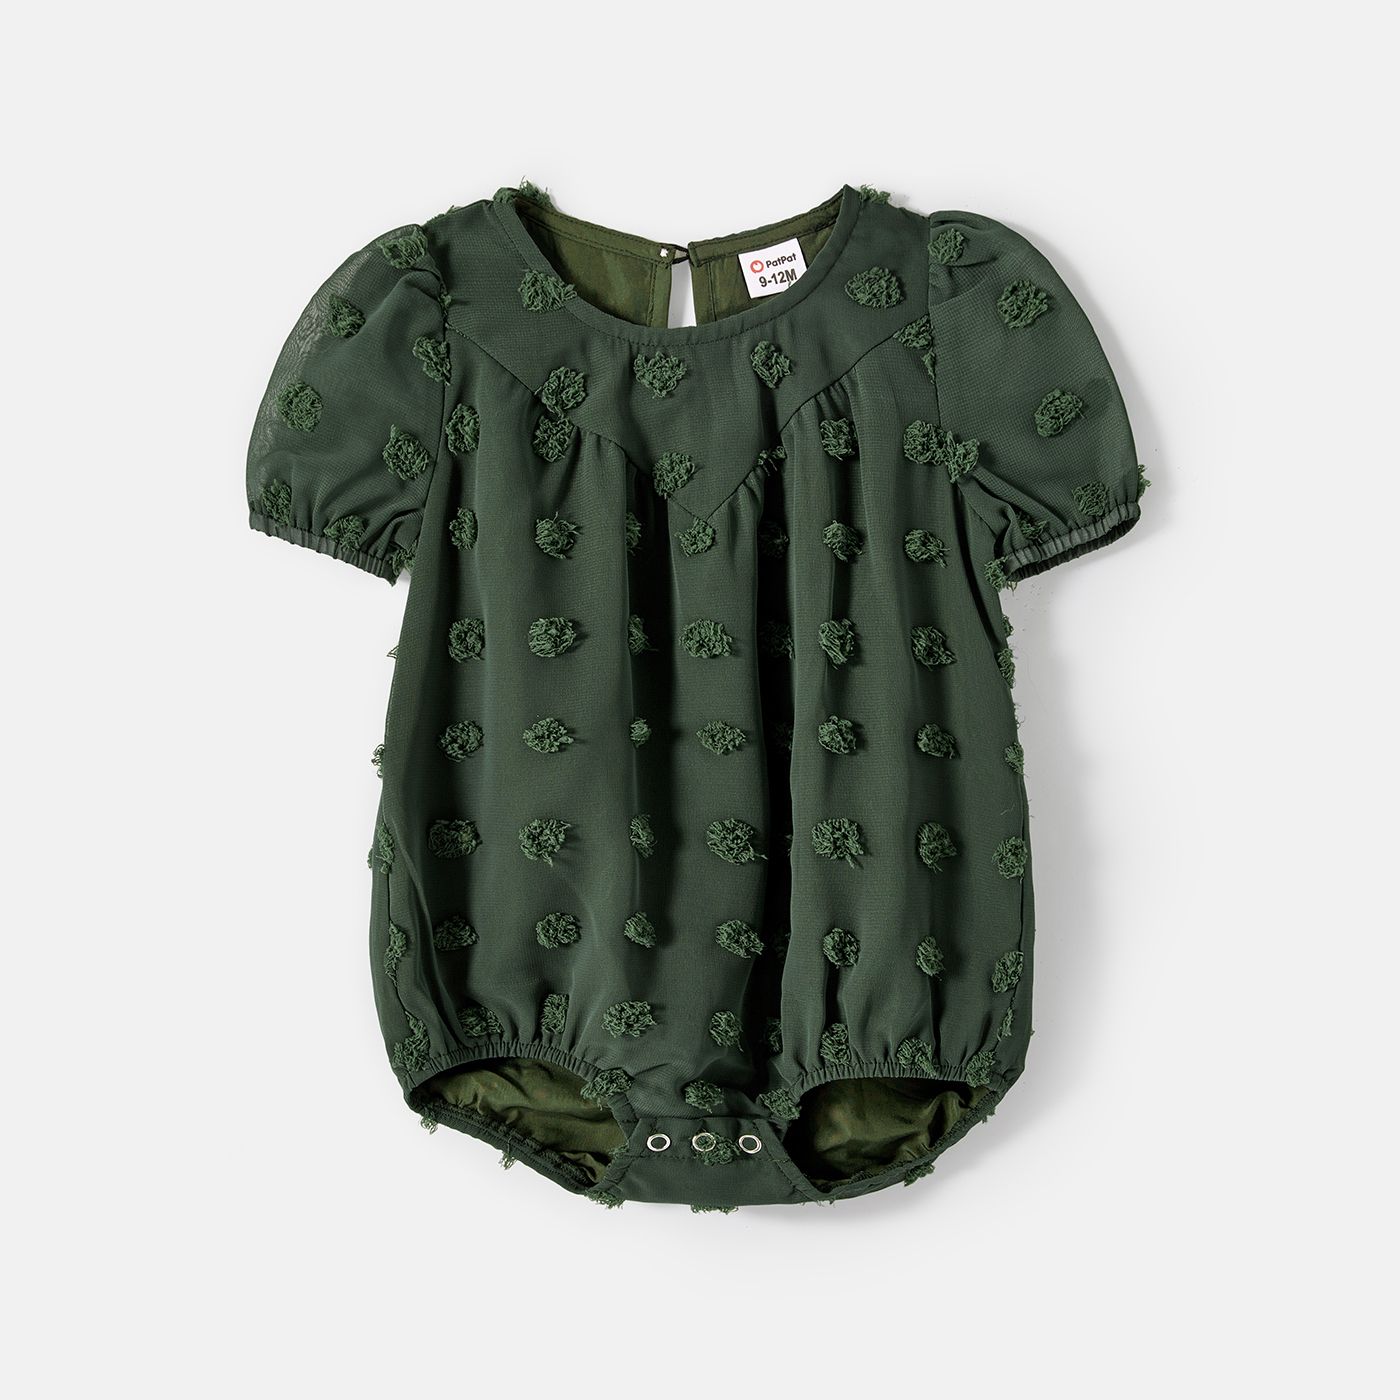 Family Matching Army Green Swiss Dots Cross Wrap V Neck Short-sleeve Dresses and Color Block T-shirt